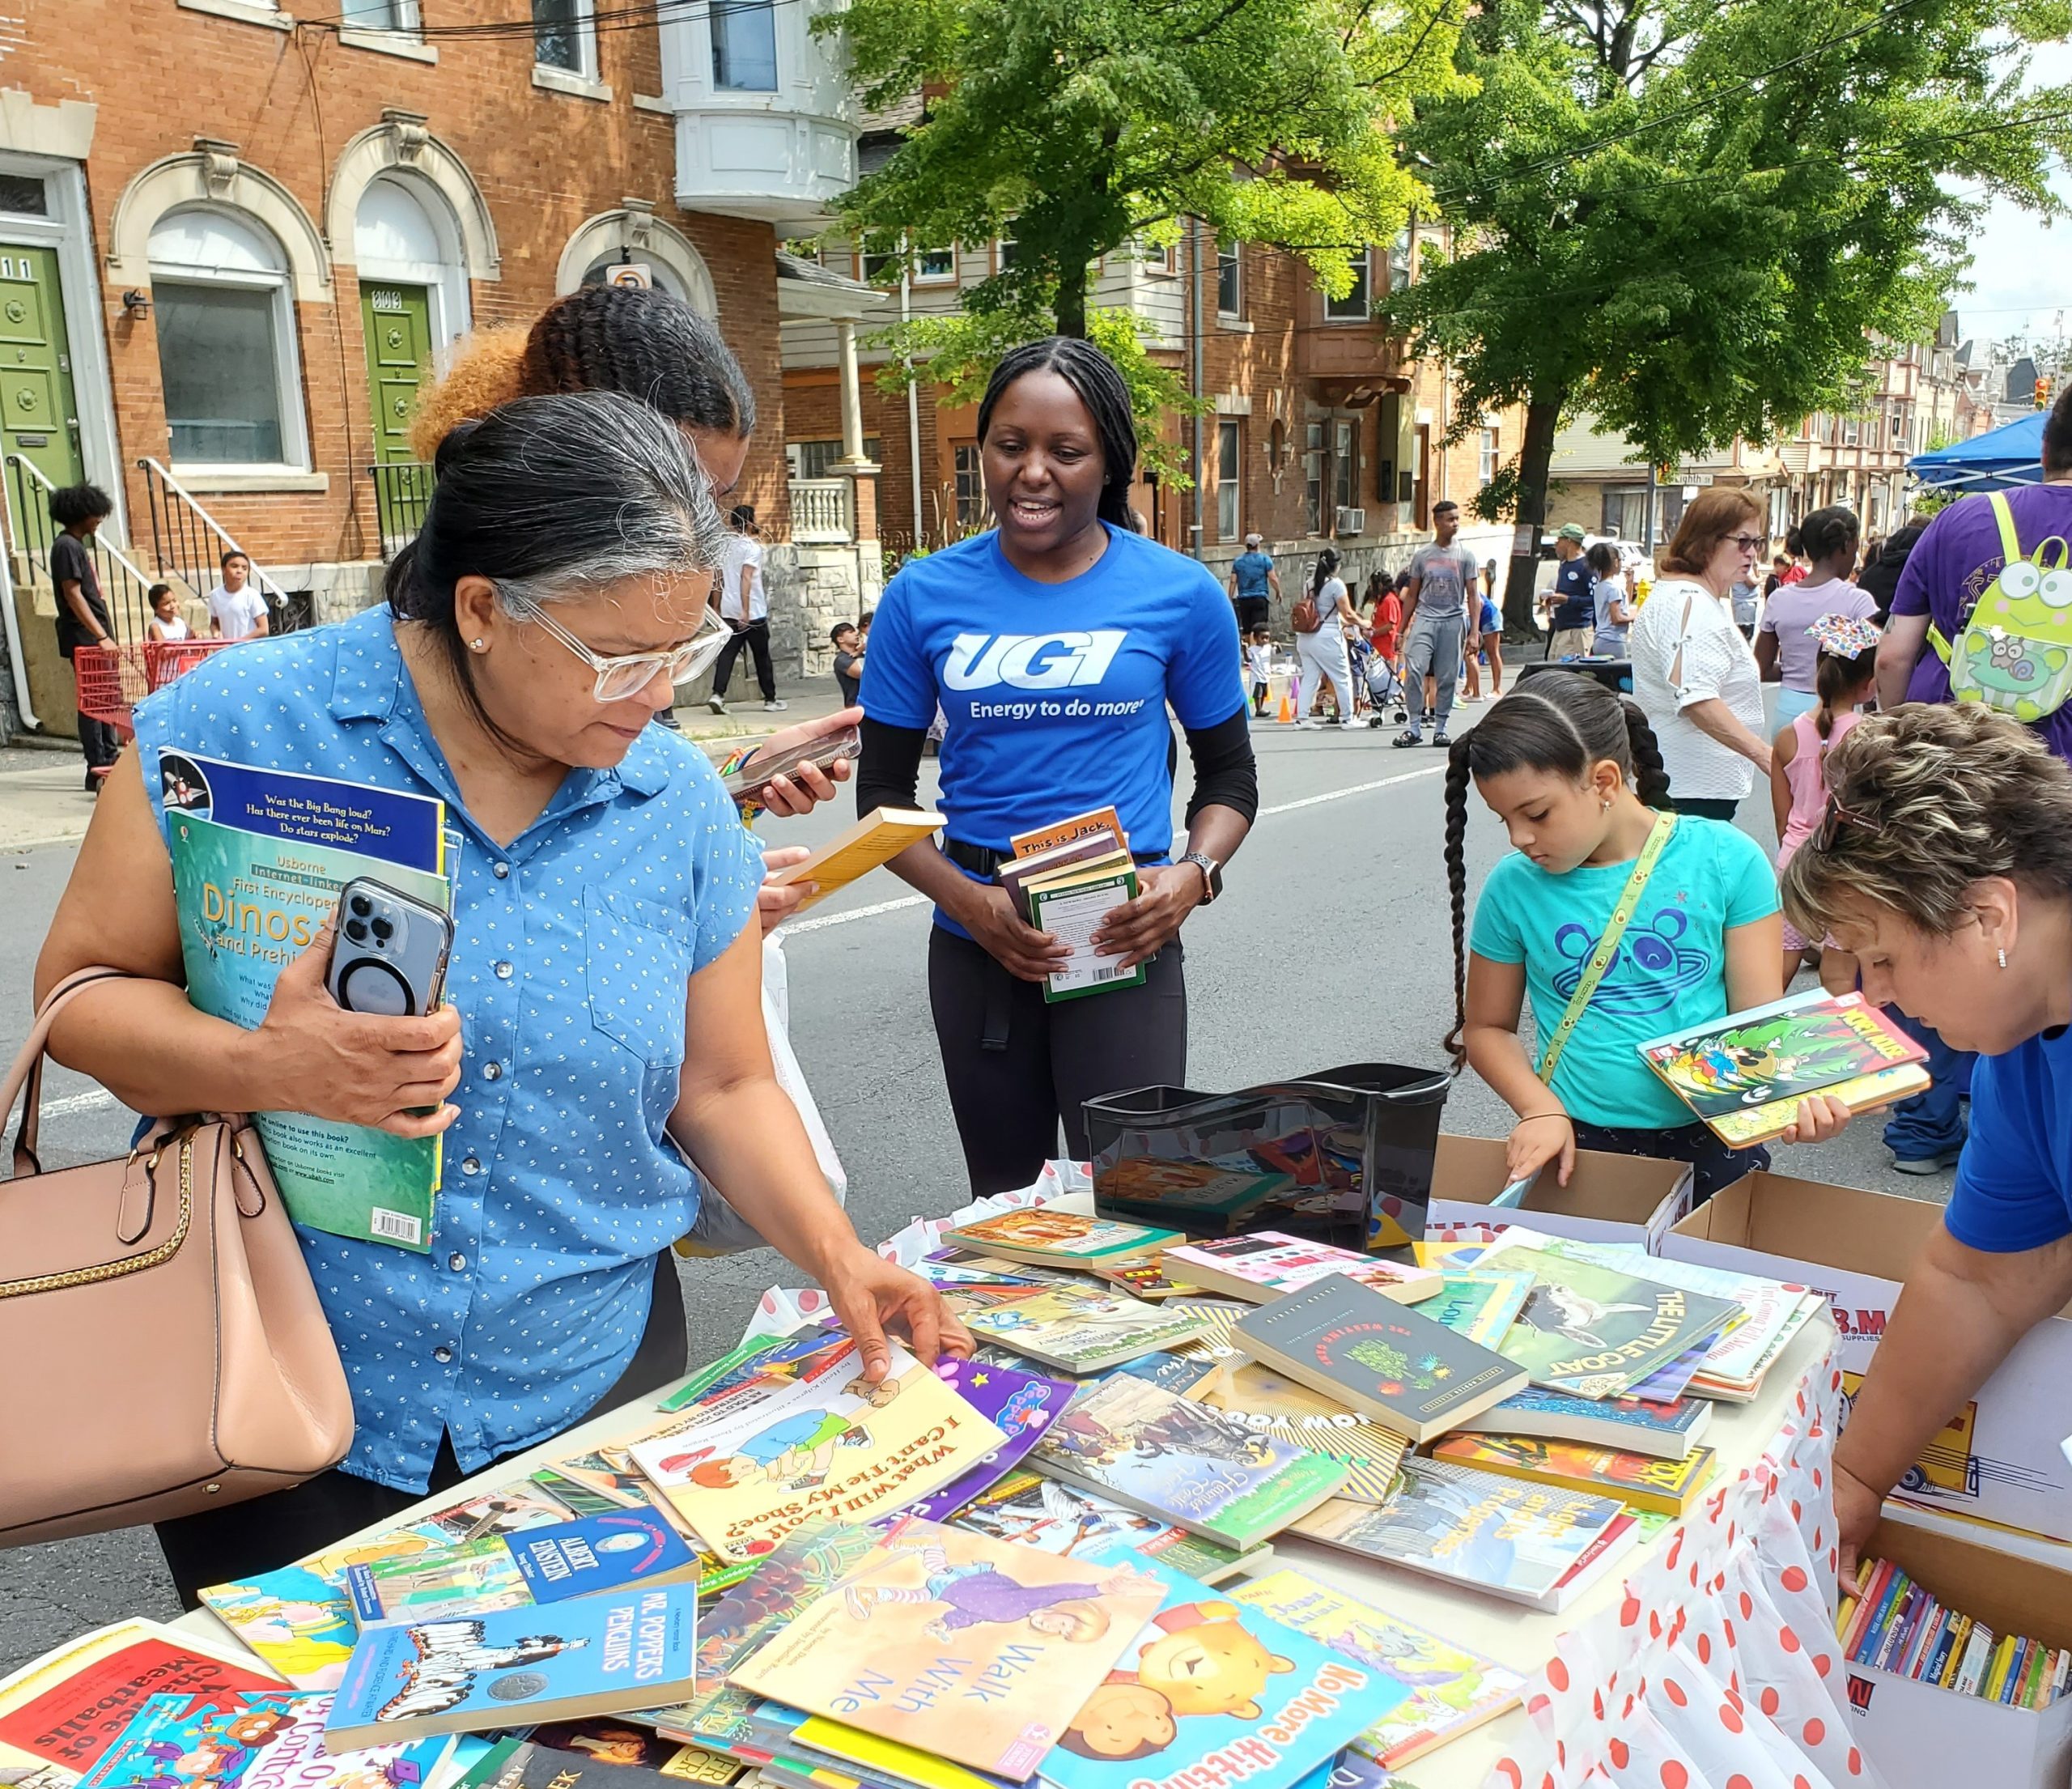 UGI employee hands out books to community members.